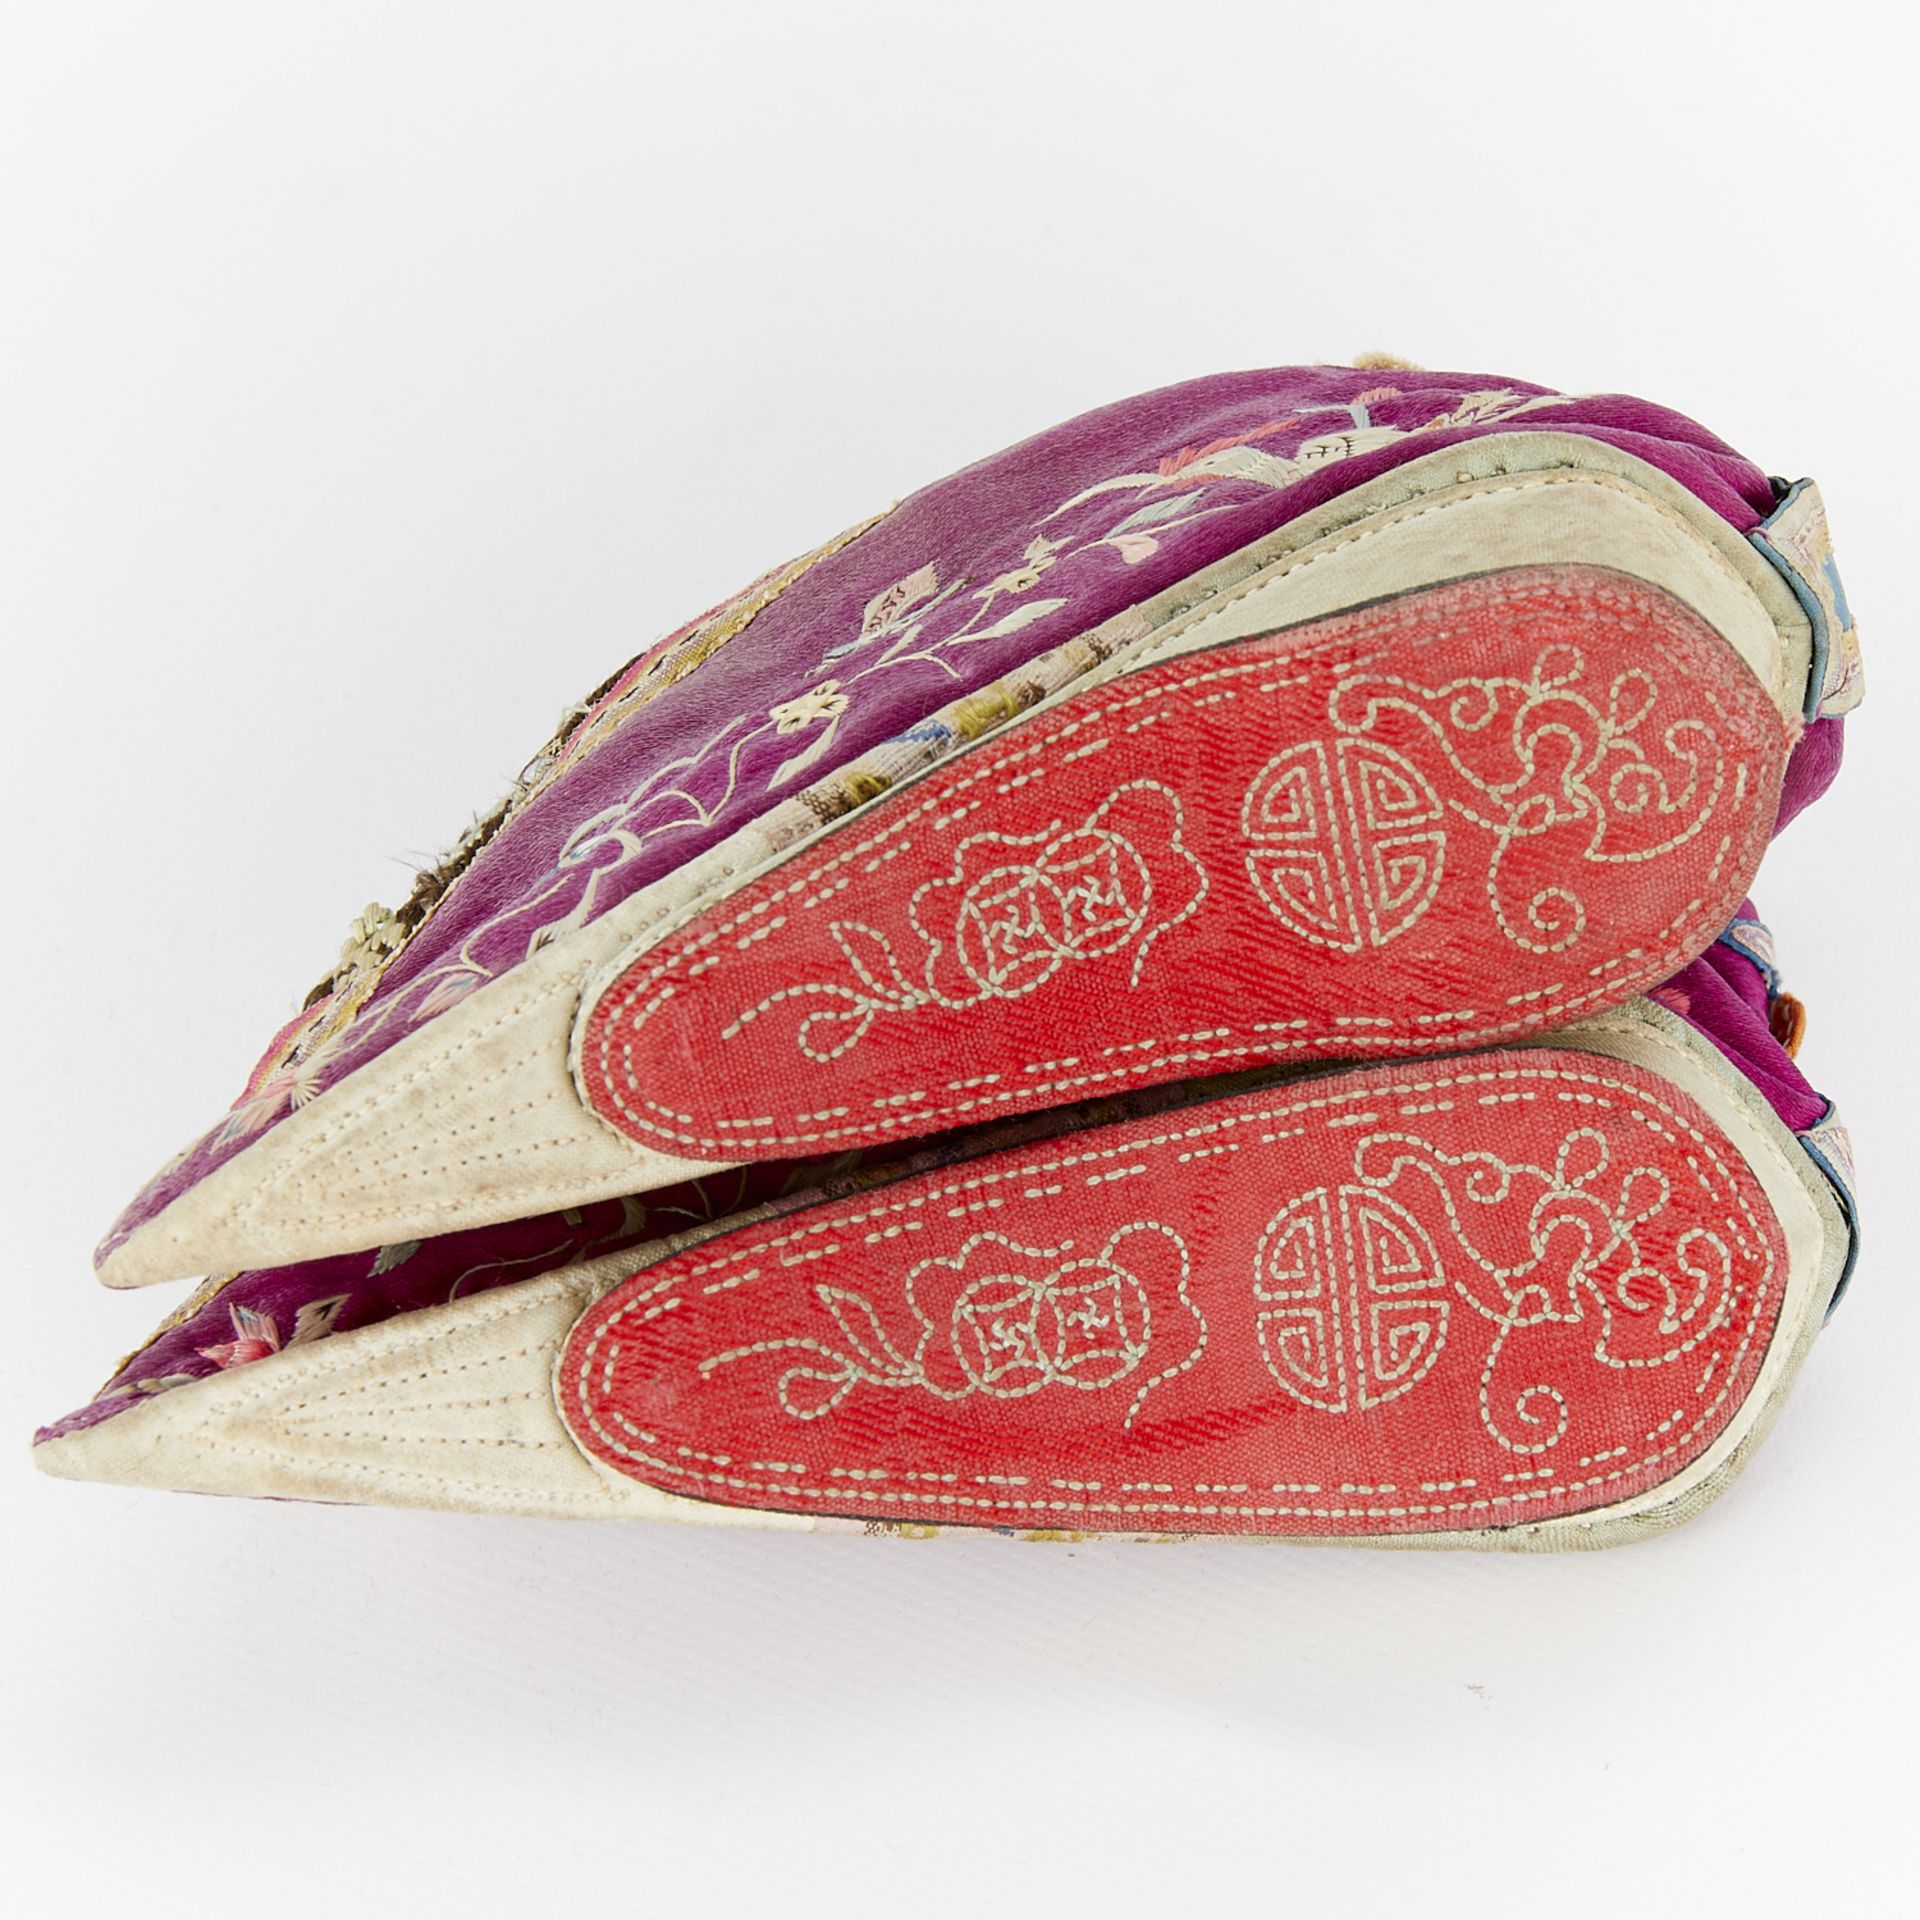 6 Pairs of Chinese Silk Foot Binding Shoes - Image 2 of 12